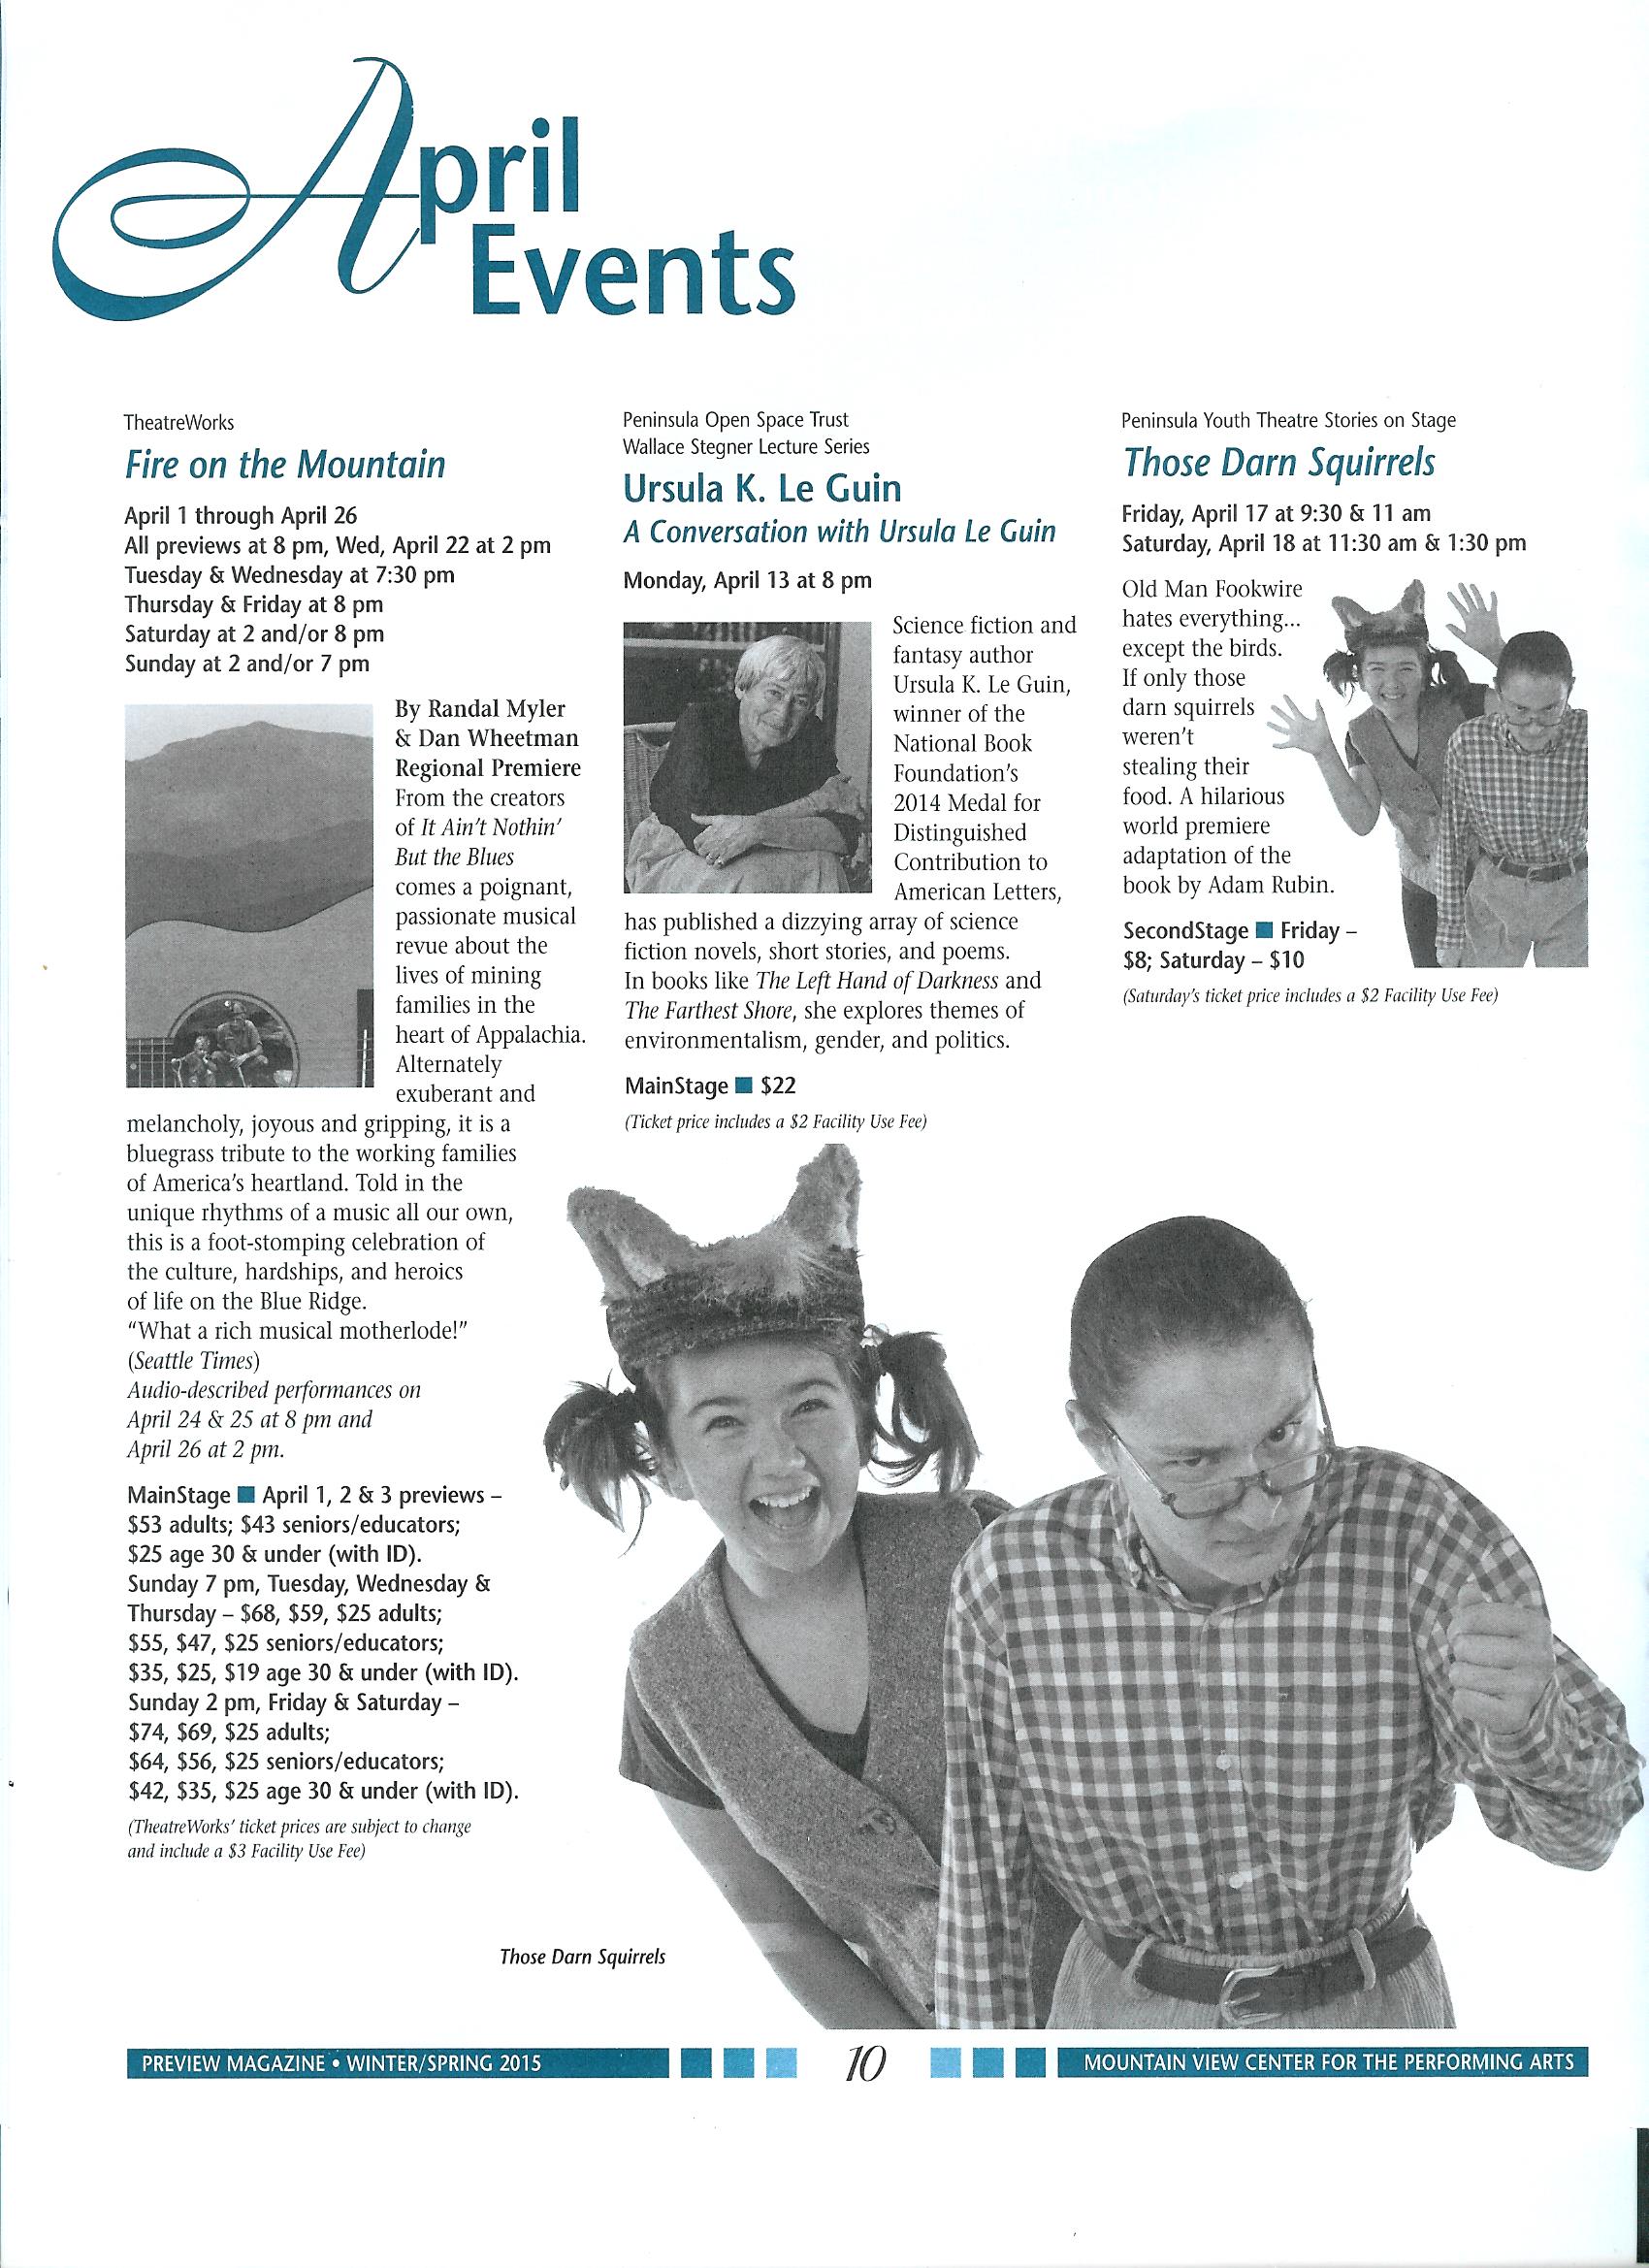 Mountain View Center for Performing Arts Magazine